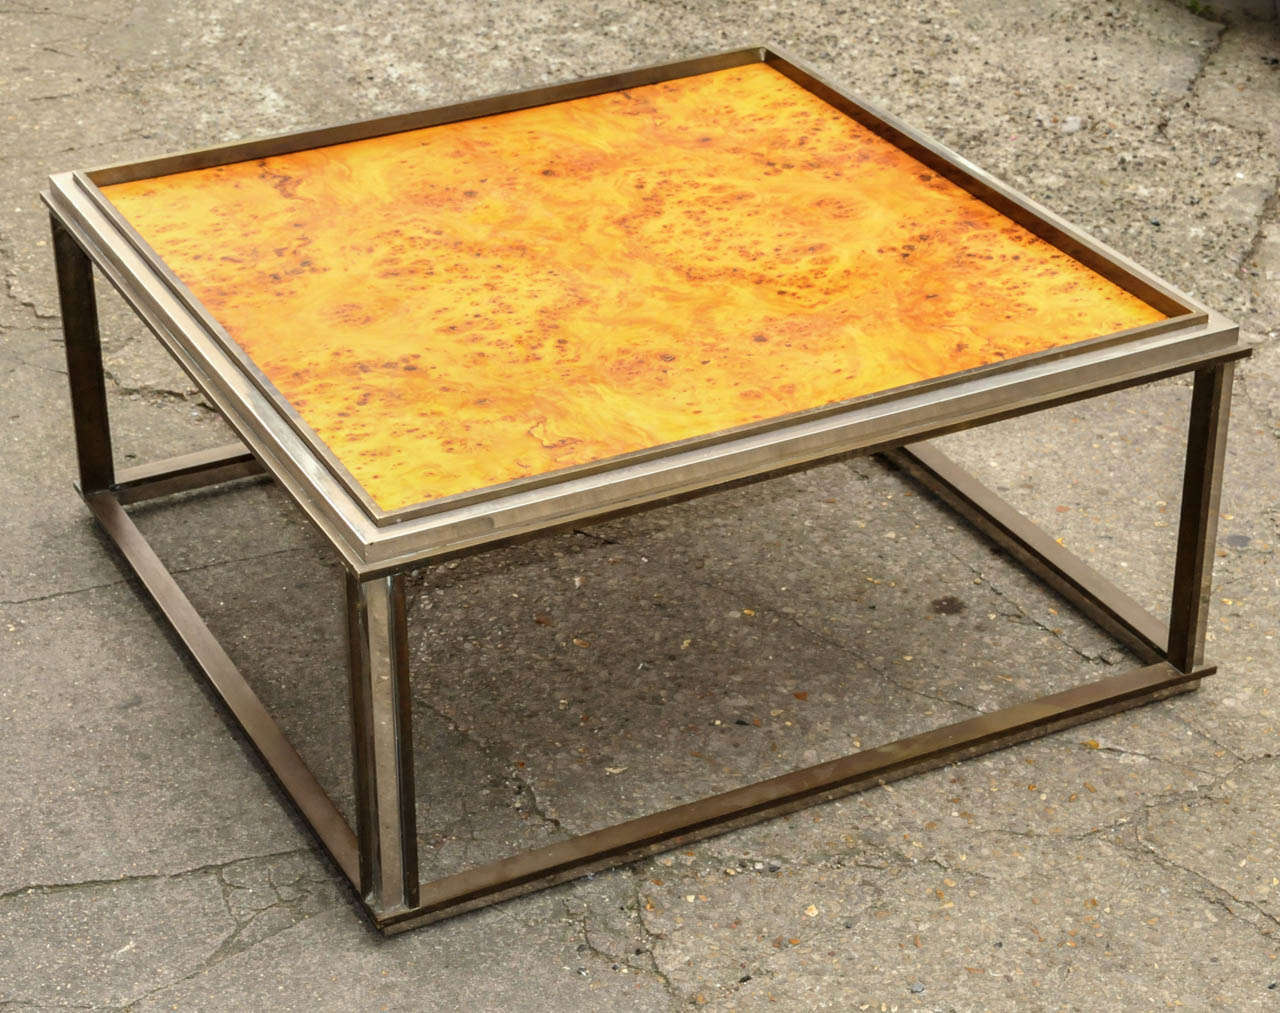 1970's Italian coffee table. Chrome steel, brass and blond wood. Good condition. Normal wear consistent with age and use.